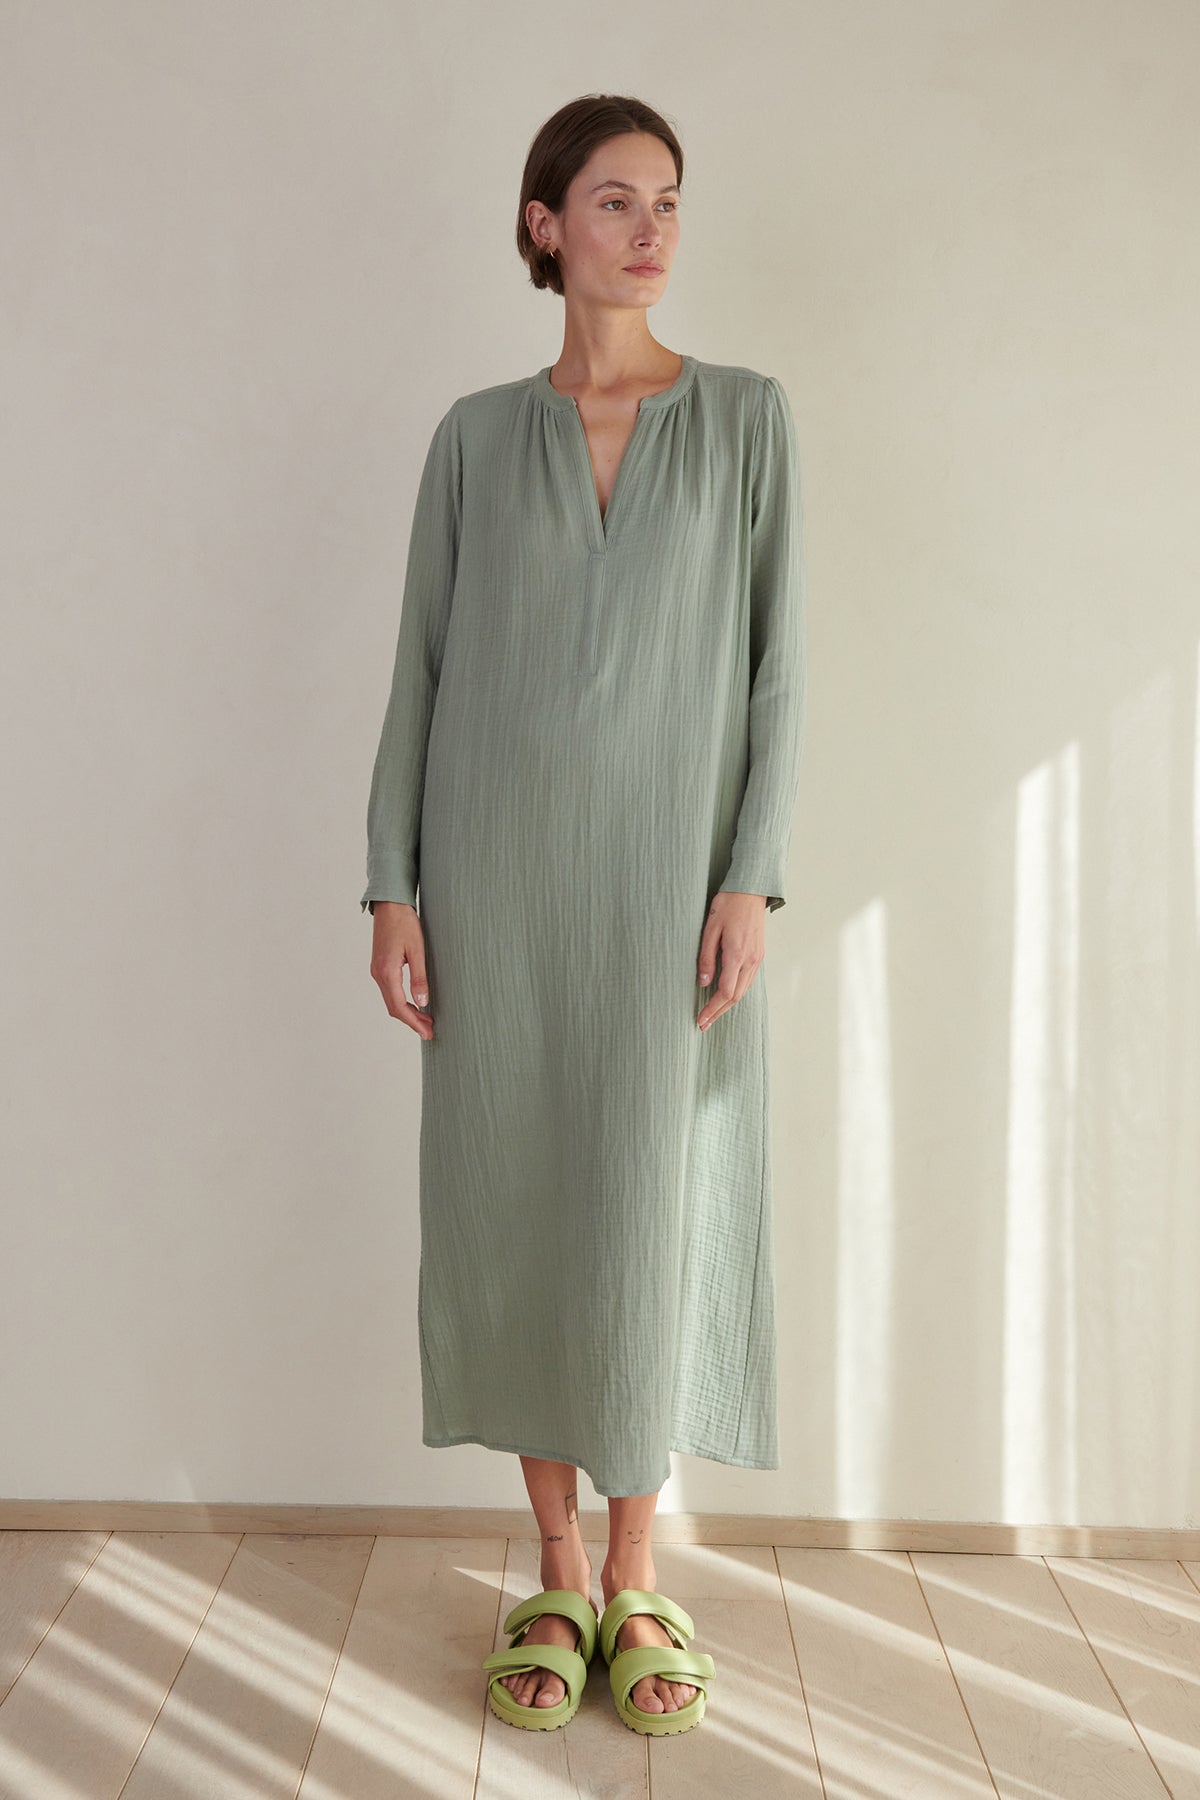 A woman wearing the DOHENY DRESS by Velvet by Jenny Graham and green sandals.-26293212905665